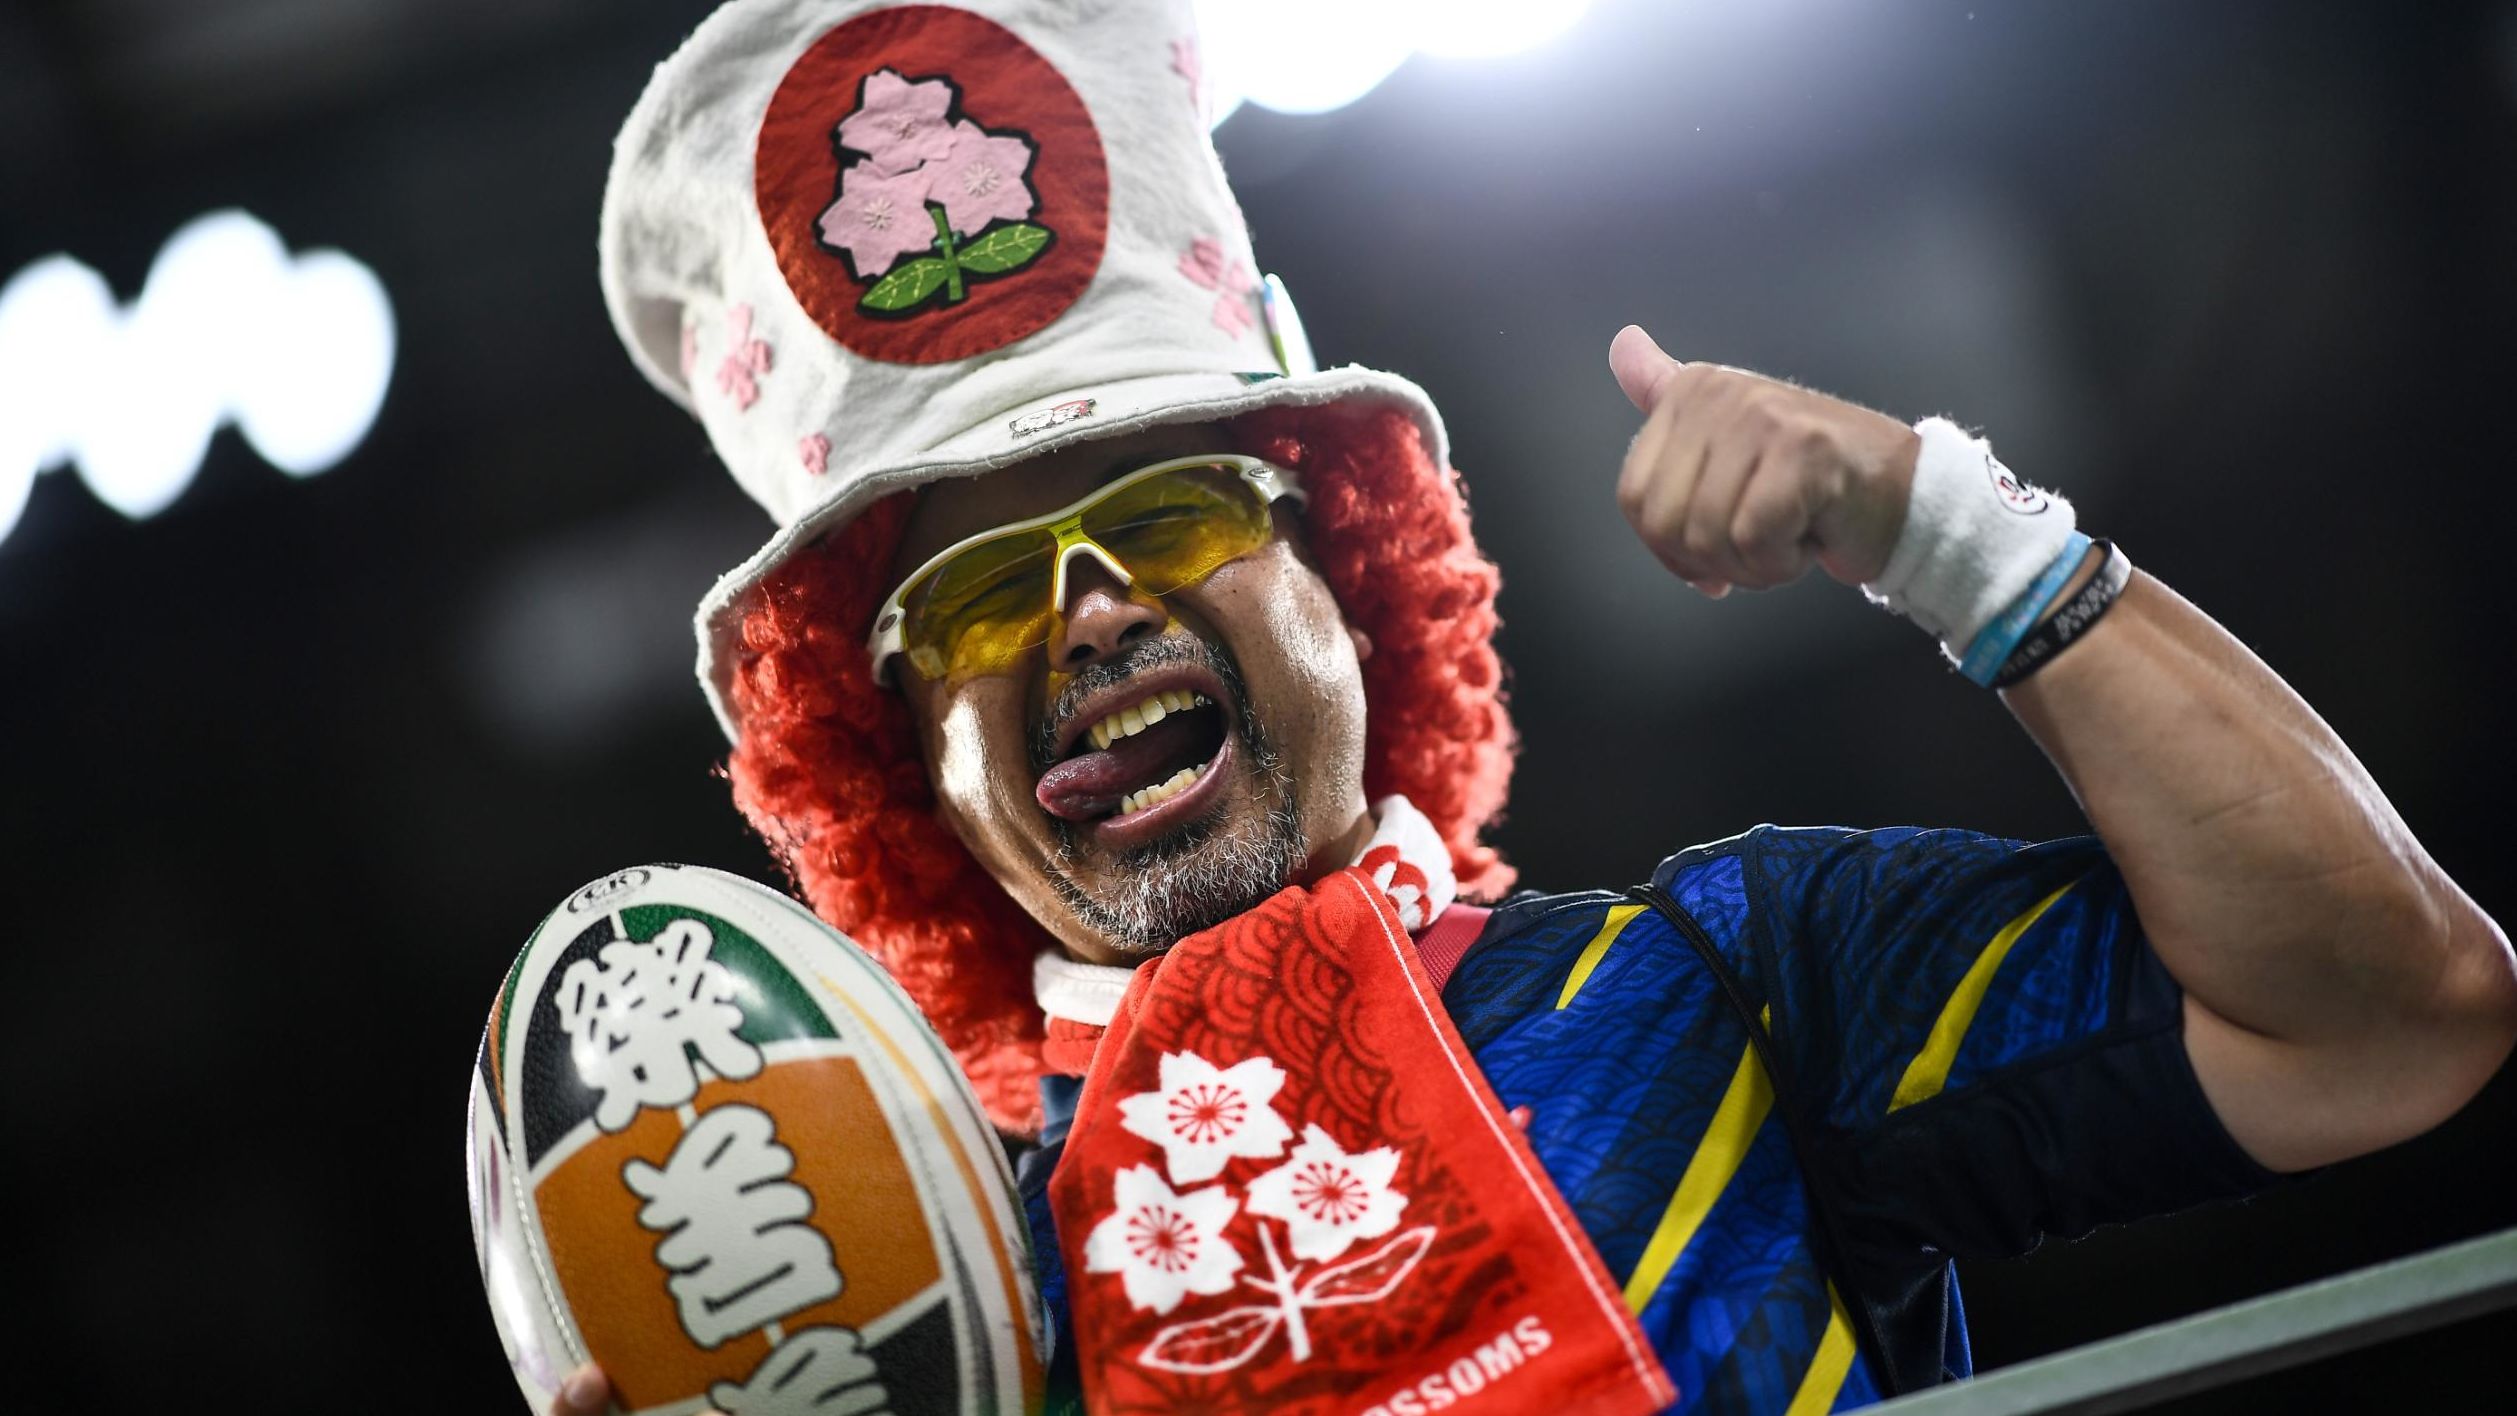 A supporter ahead of the Rugby World Cup game between Wales and Georgia.